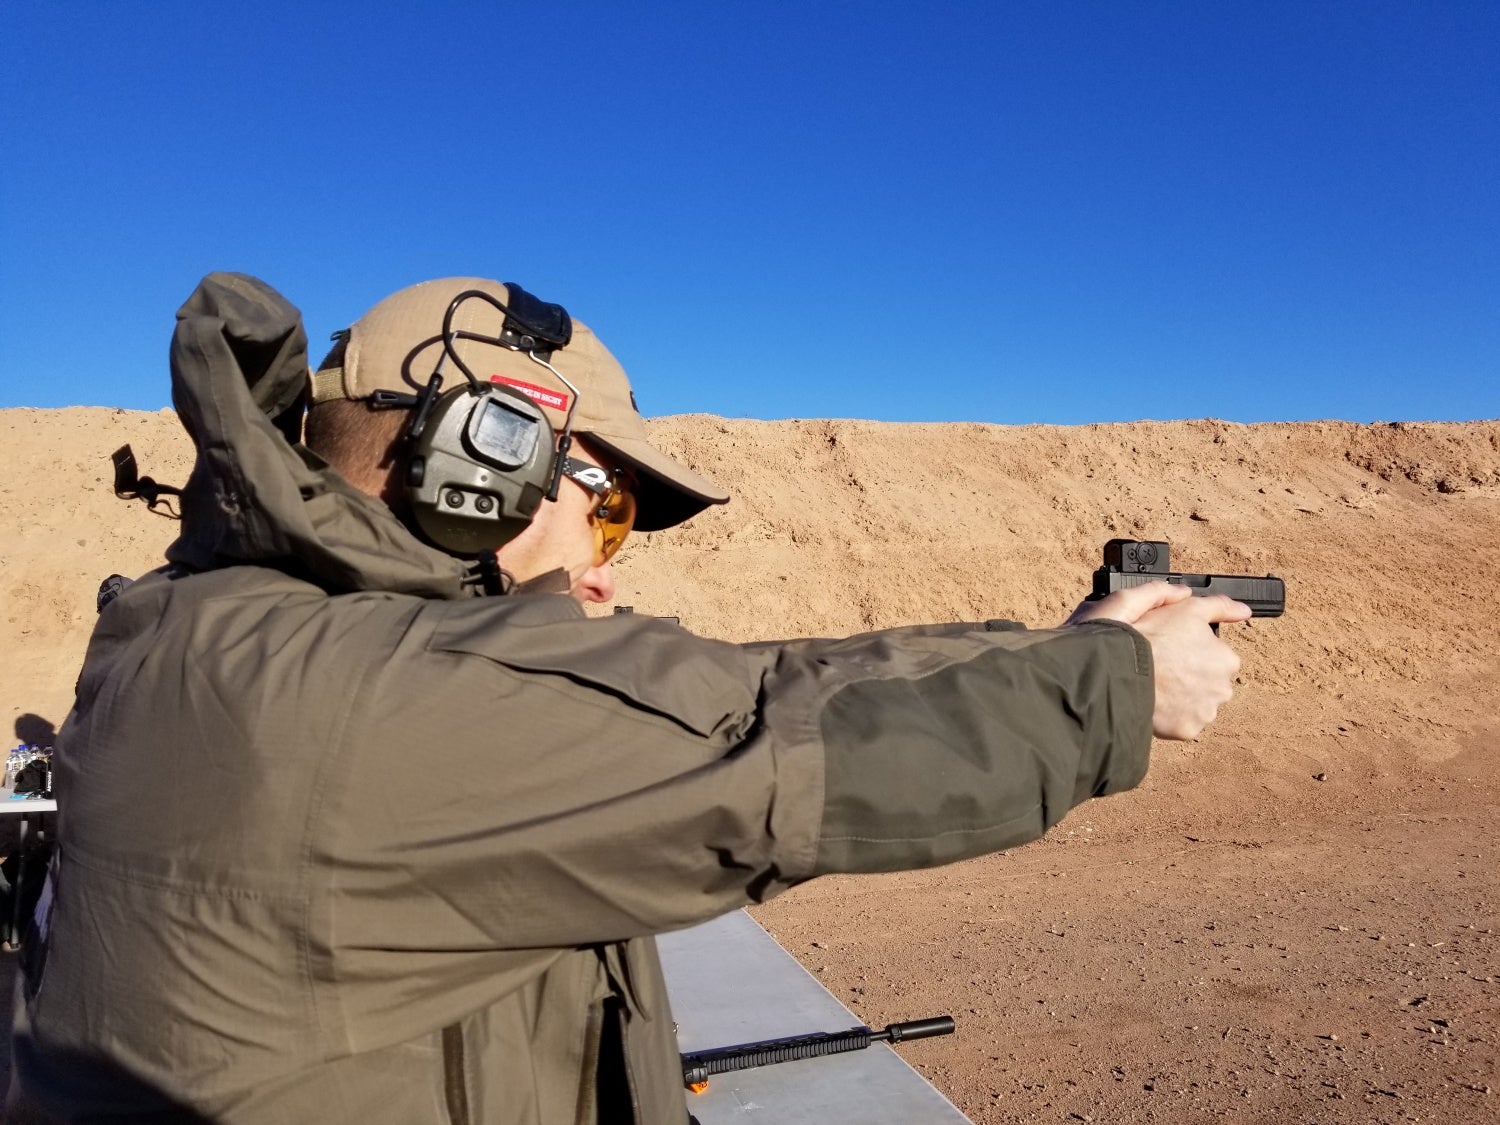 Aimpoint representative shooting a Glock 17 gen 5 with ACRO P-1 red dot sight.